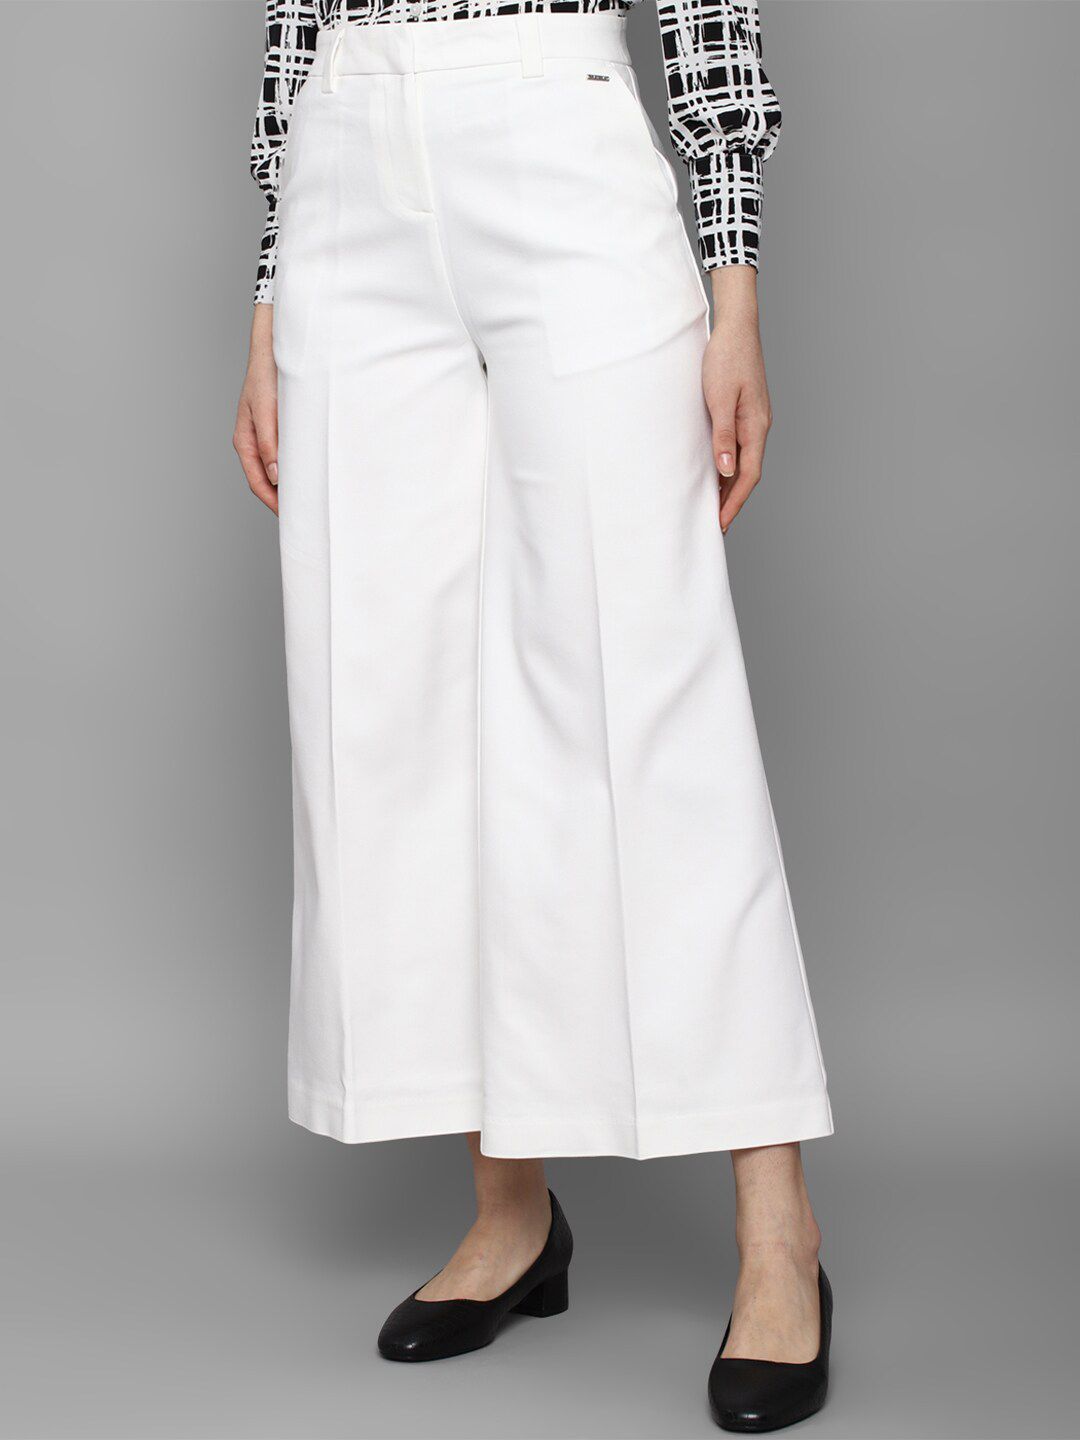 Allen Solly Woman Women White Culottes Trousers Price in India